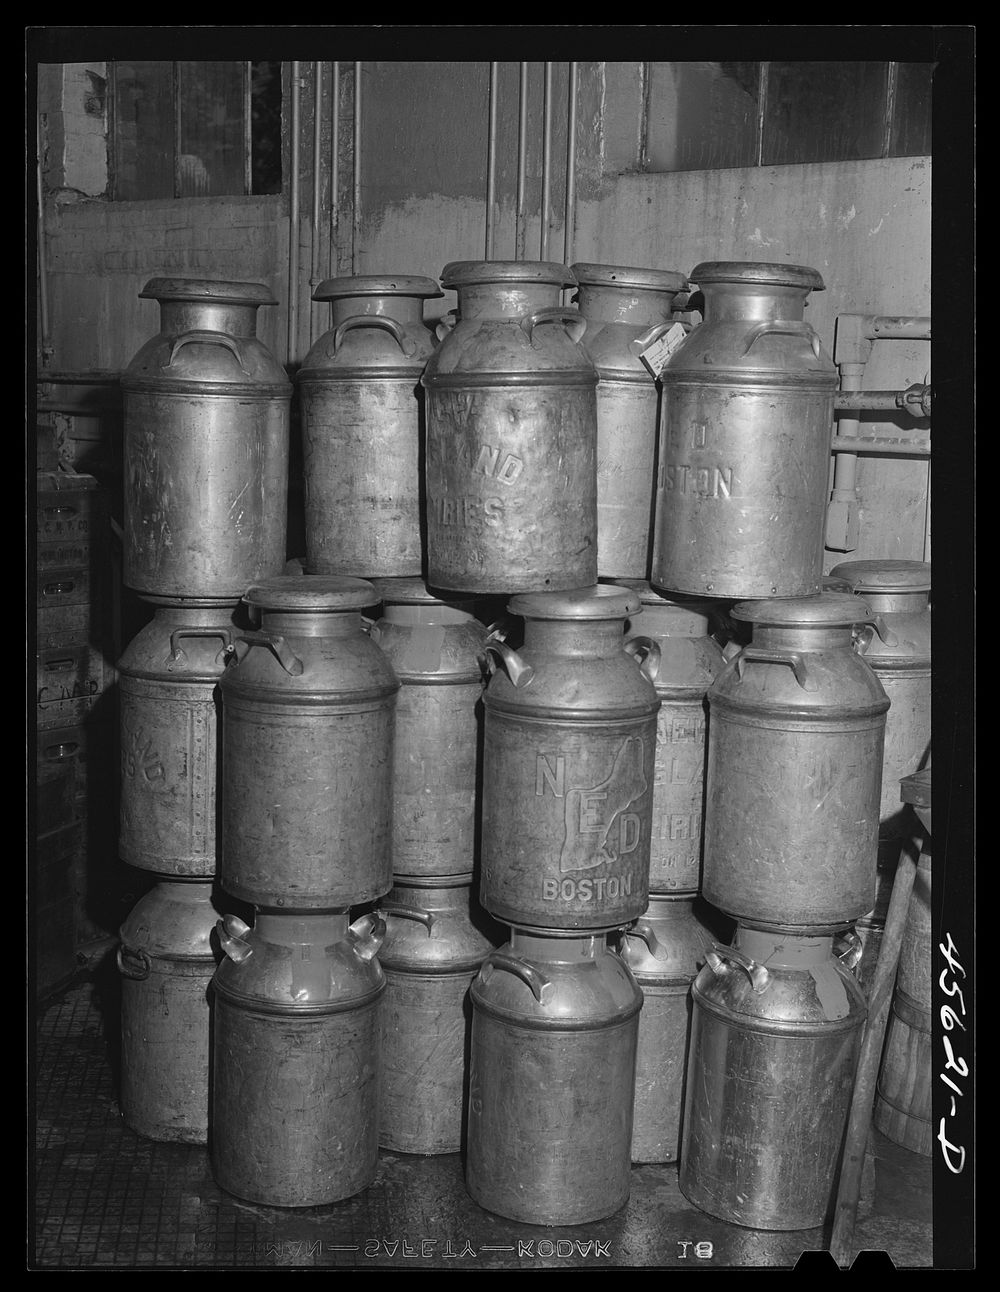 [Untitled photo, possibly related to: Farmer getting his empty milk cans back at the Burlington cooperative milk bottling…